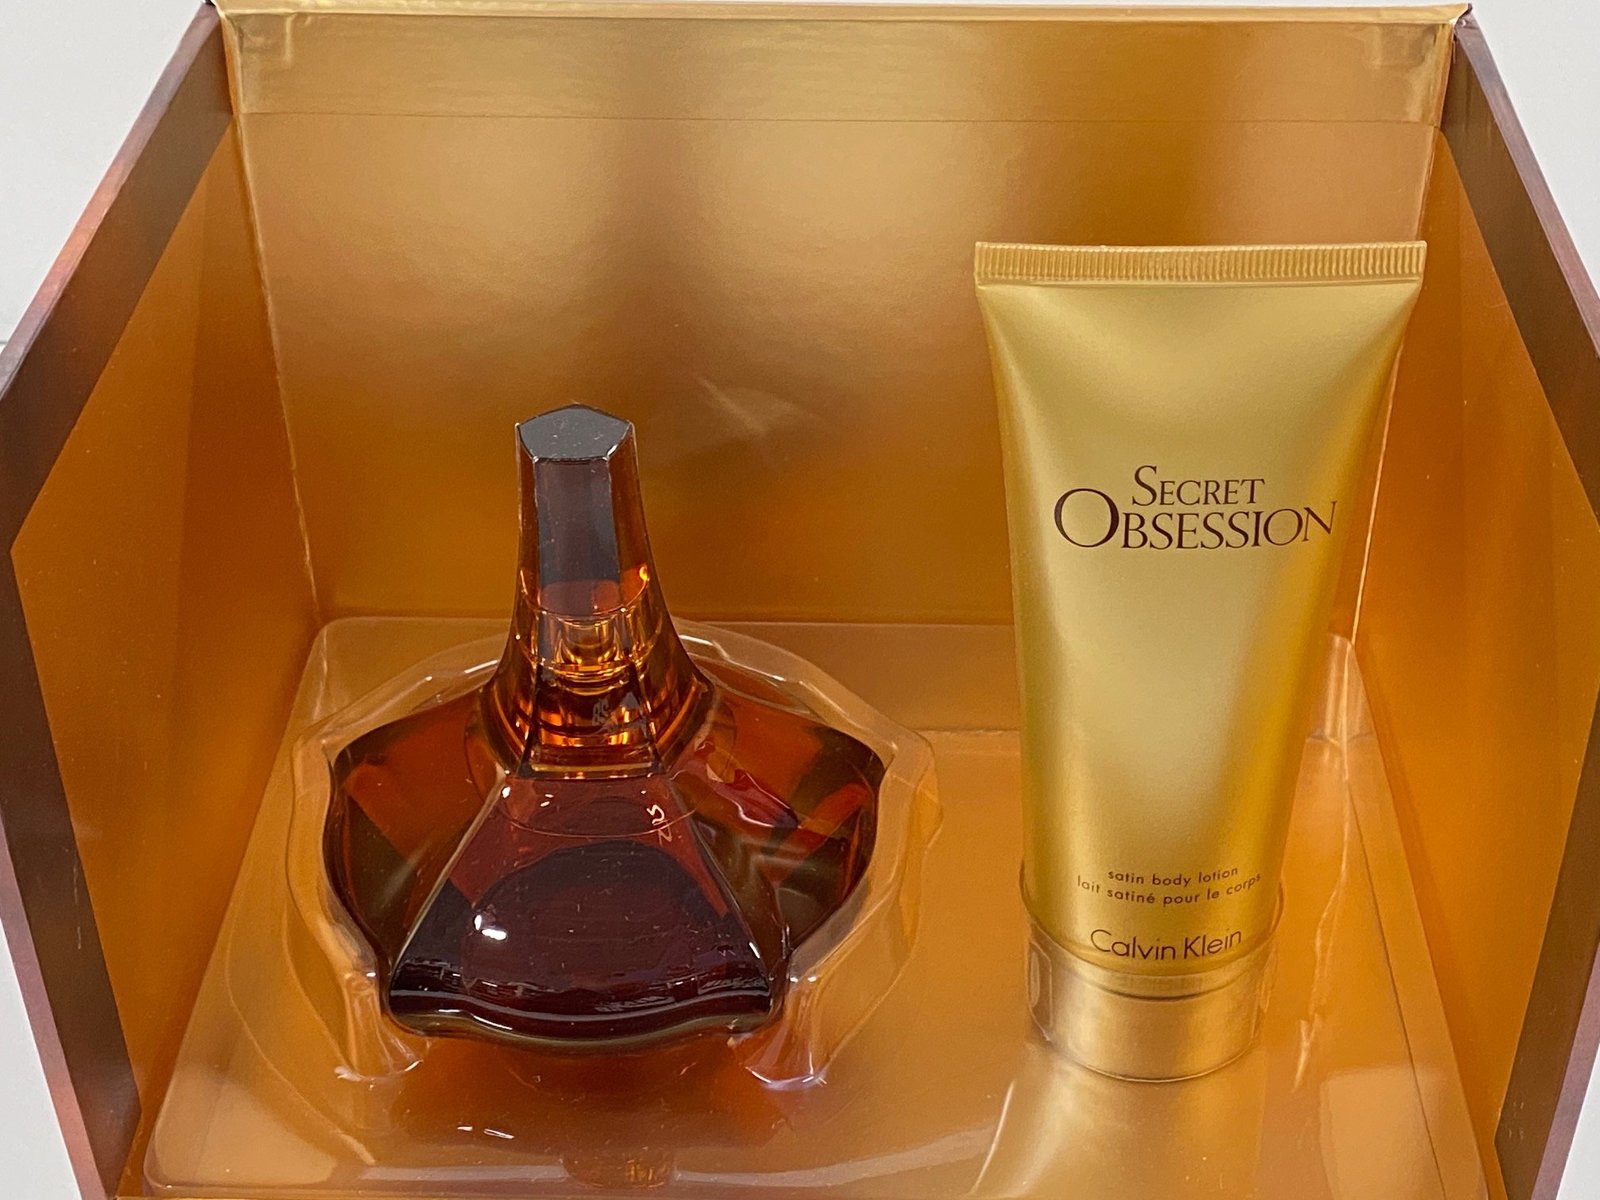 Primary image for Calvin Klein Secret Obsession 2 Pcs Gift Set For Women - new brown box